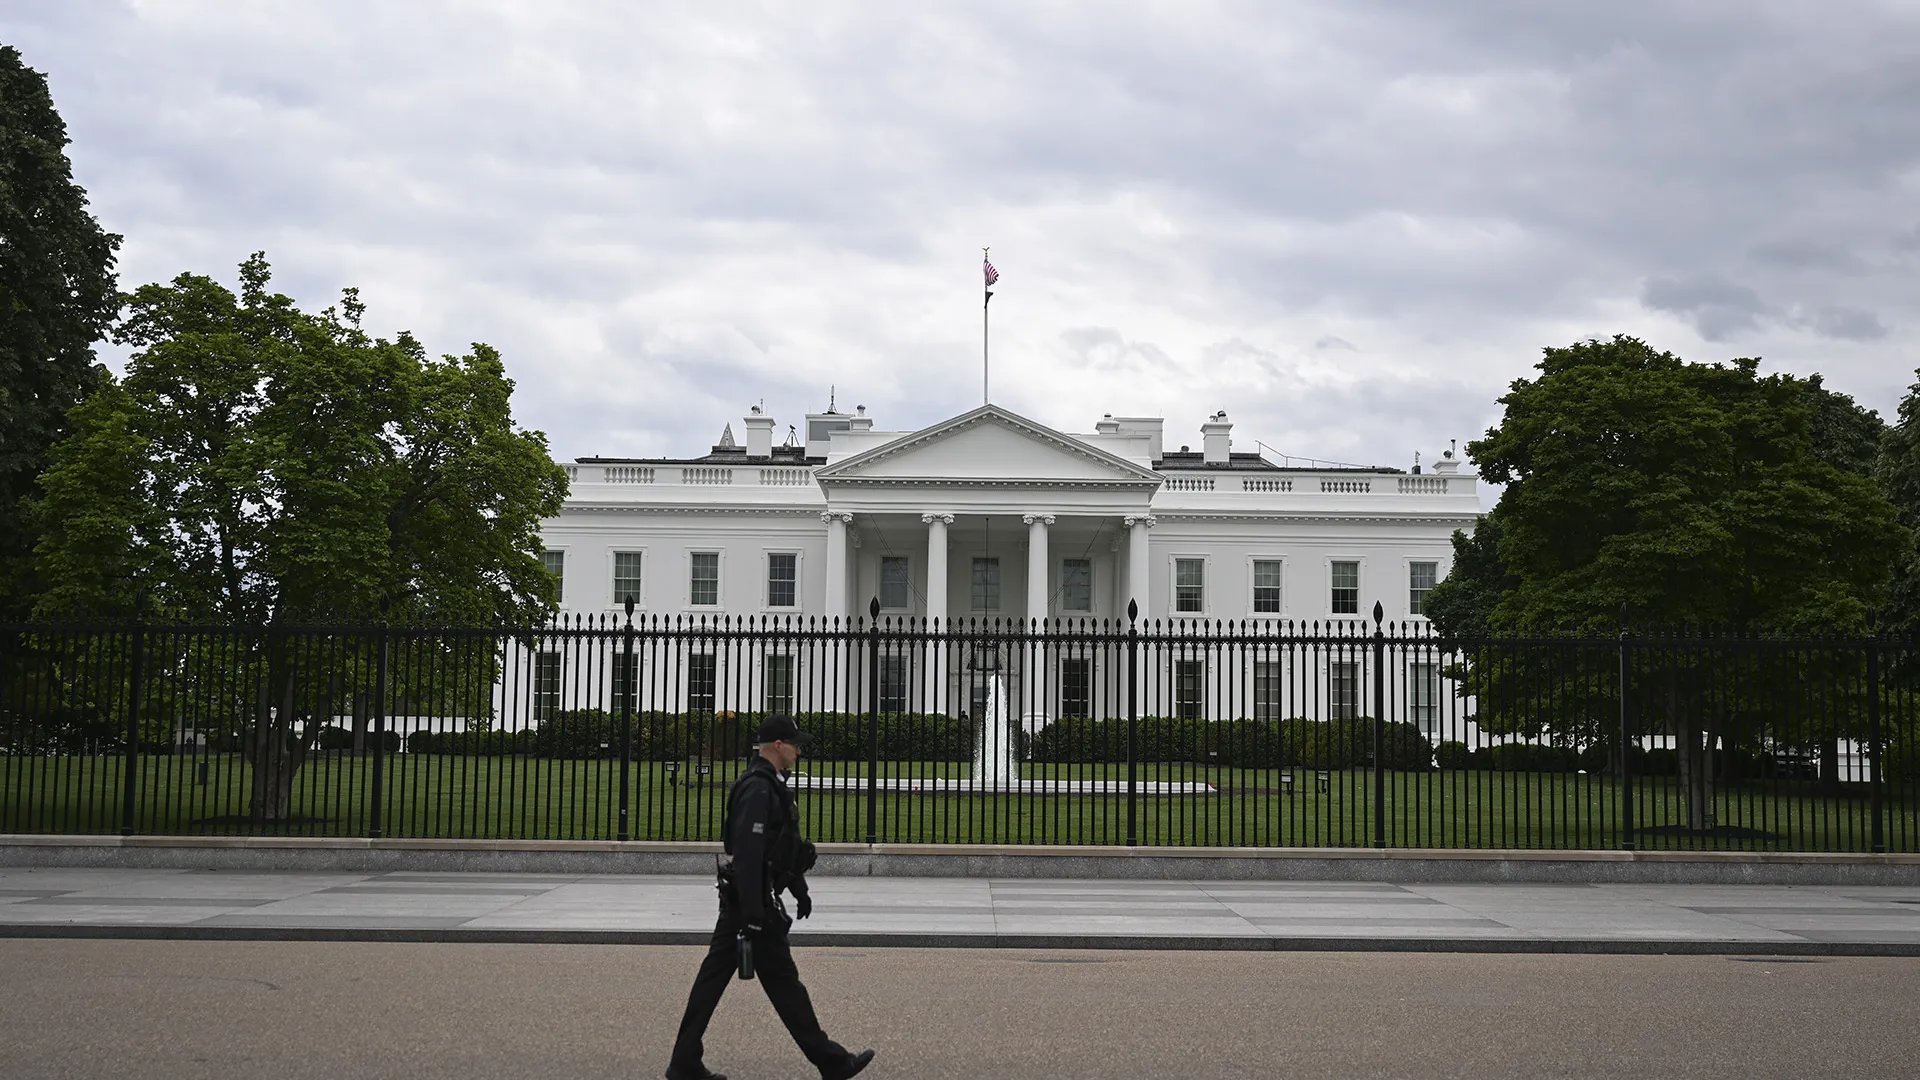 Fake 911 Call at the White House: A Dangerous Hoax Unveiled